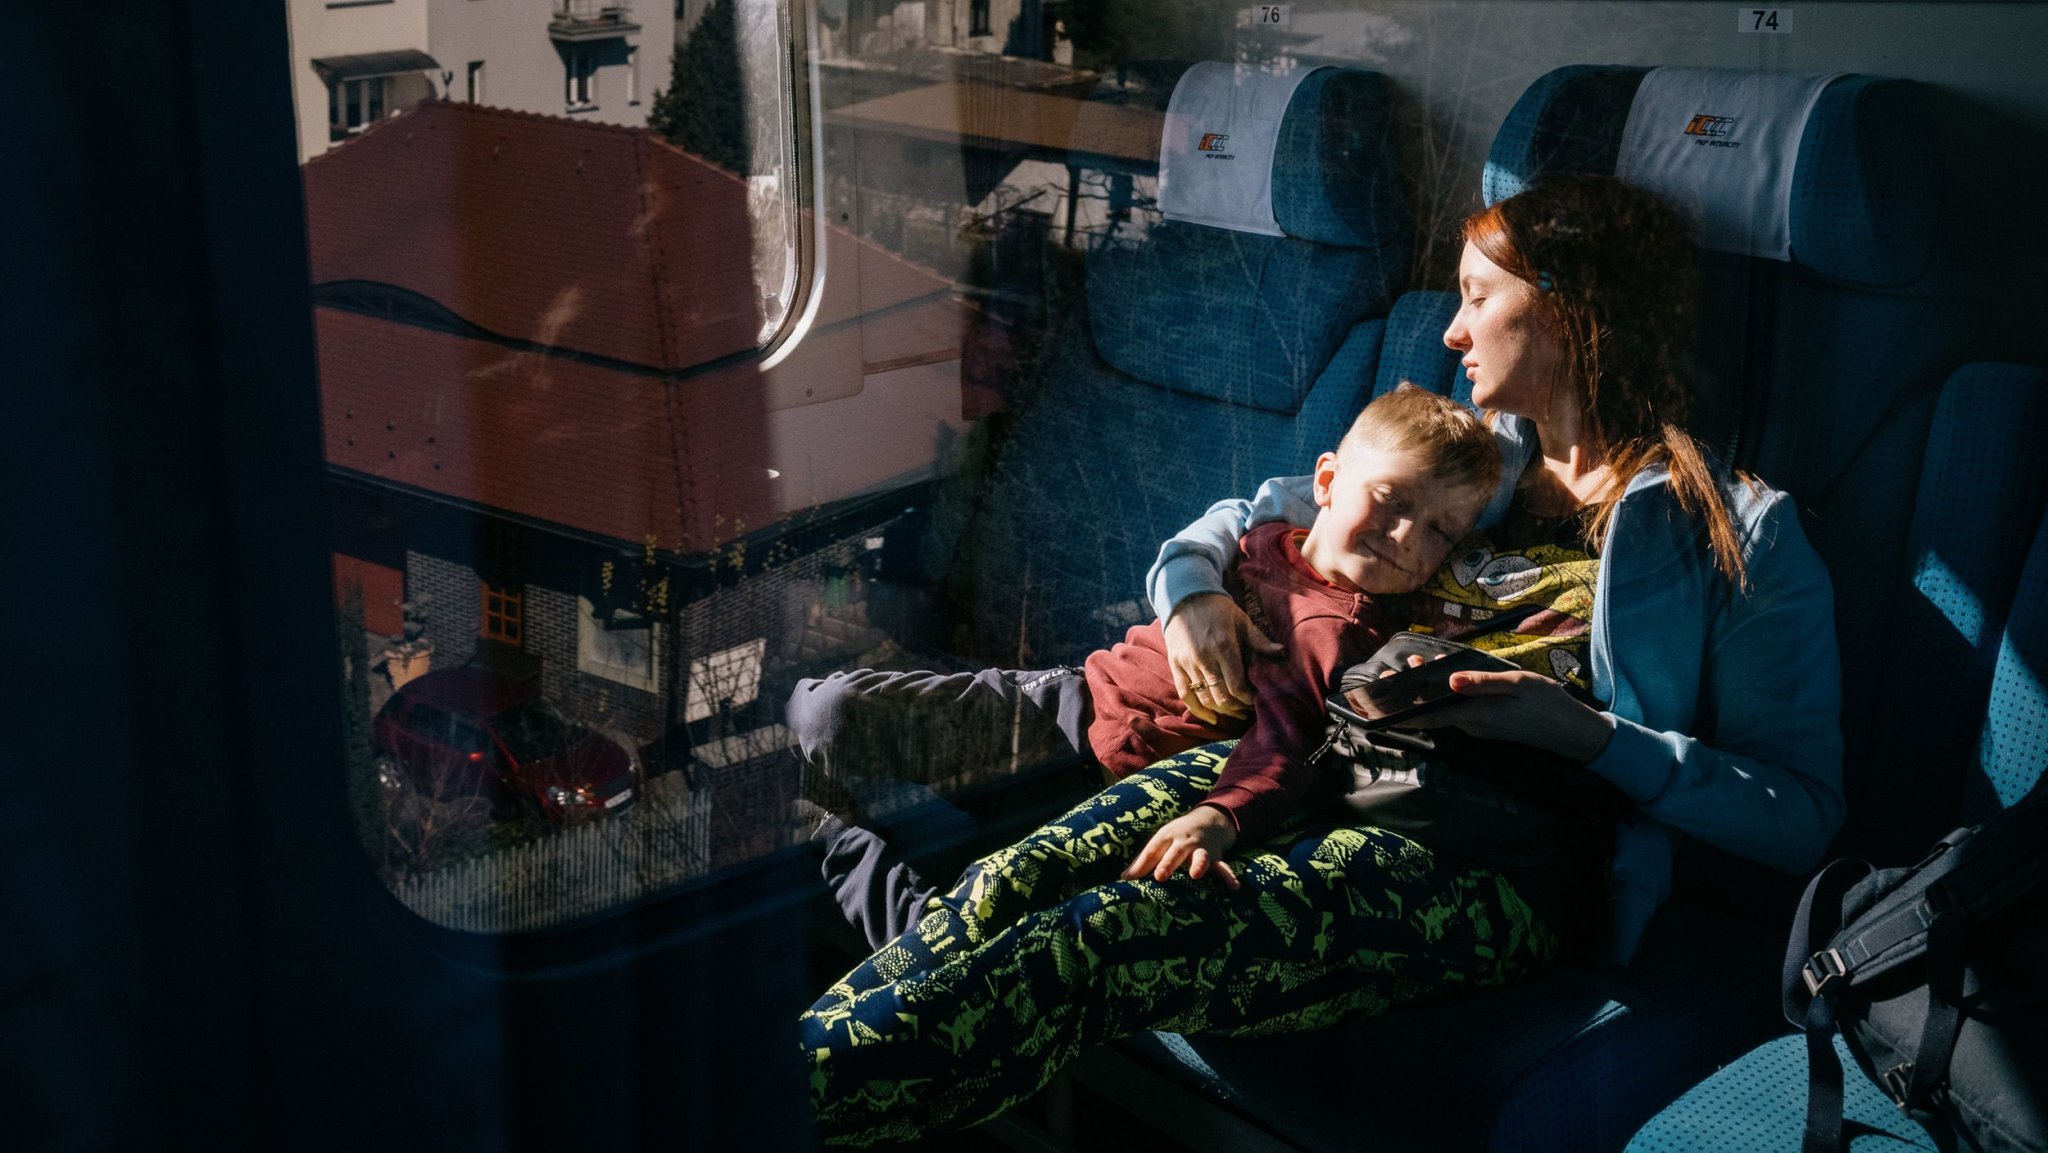 'Scary to leave everything behind': Ukrainian refugees embark on a 15-hour train journey to safety